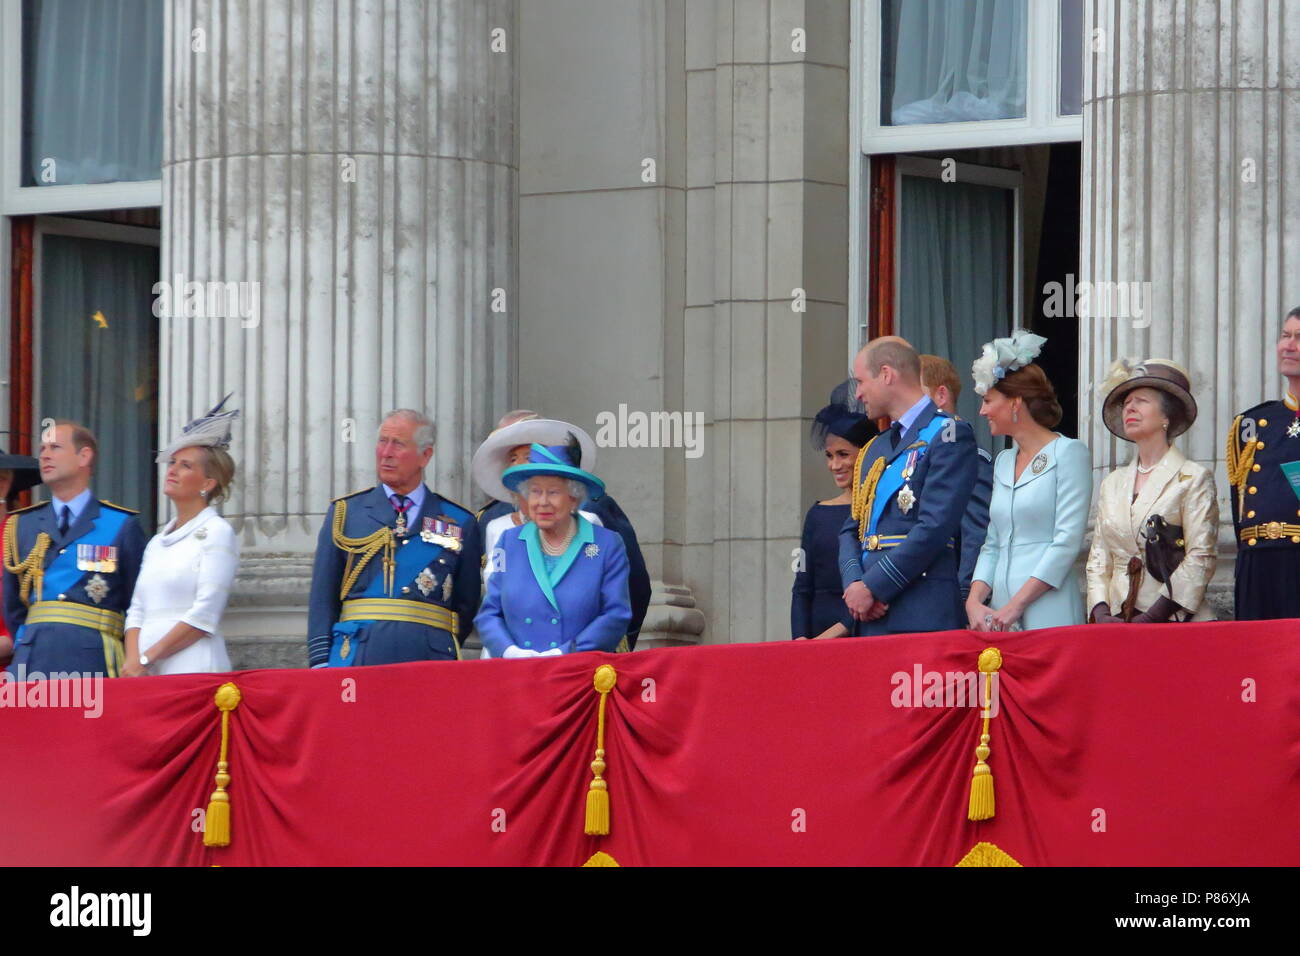 London, UK. 10th July 2018. The Royal Family watches the spectacular flypast of 100 aircraft from all aviation periods to mark 100 years of the Royal Air Force from the balcony of Buckingham Palace. Credit: Uwe Deffner/Alamy Live News Stock Photo